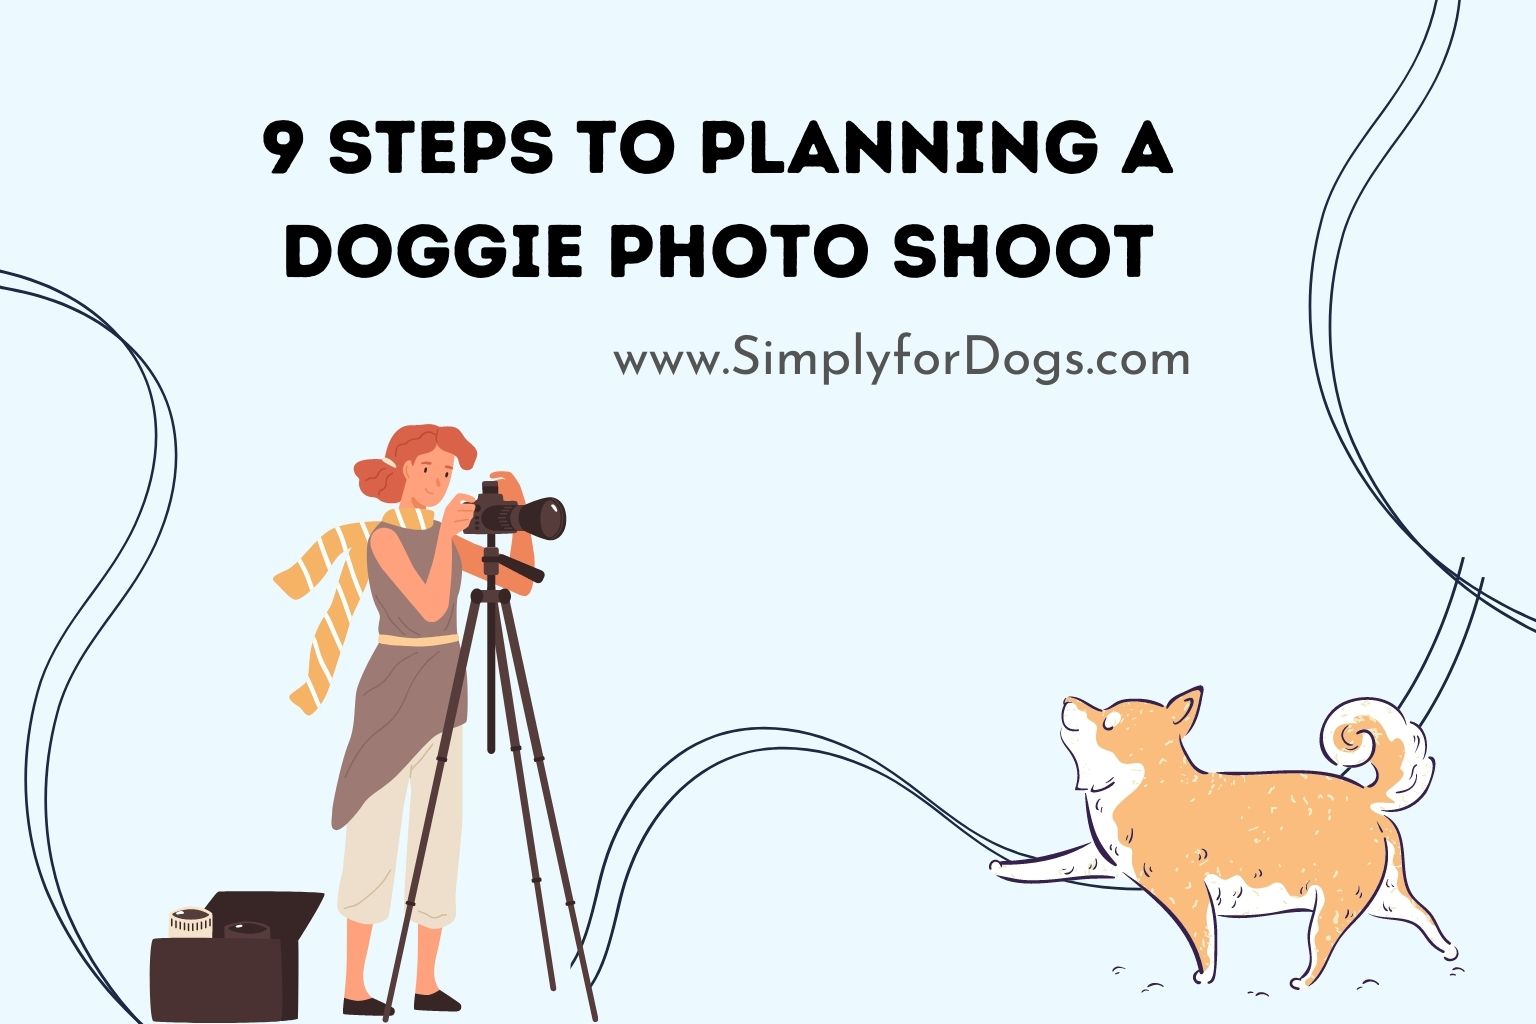 9 Steps to Planning a Doggie Photo Shoot